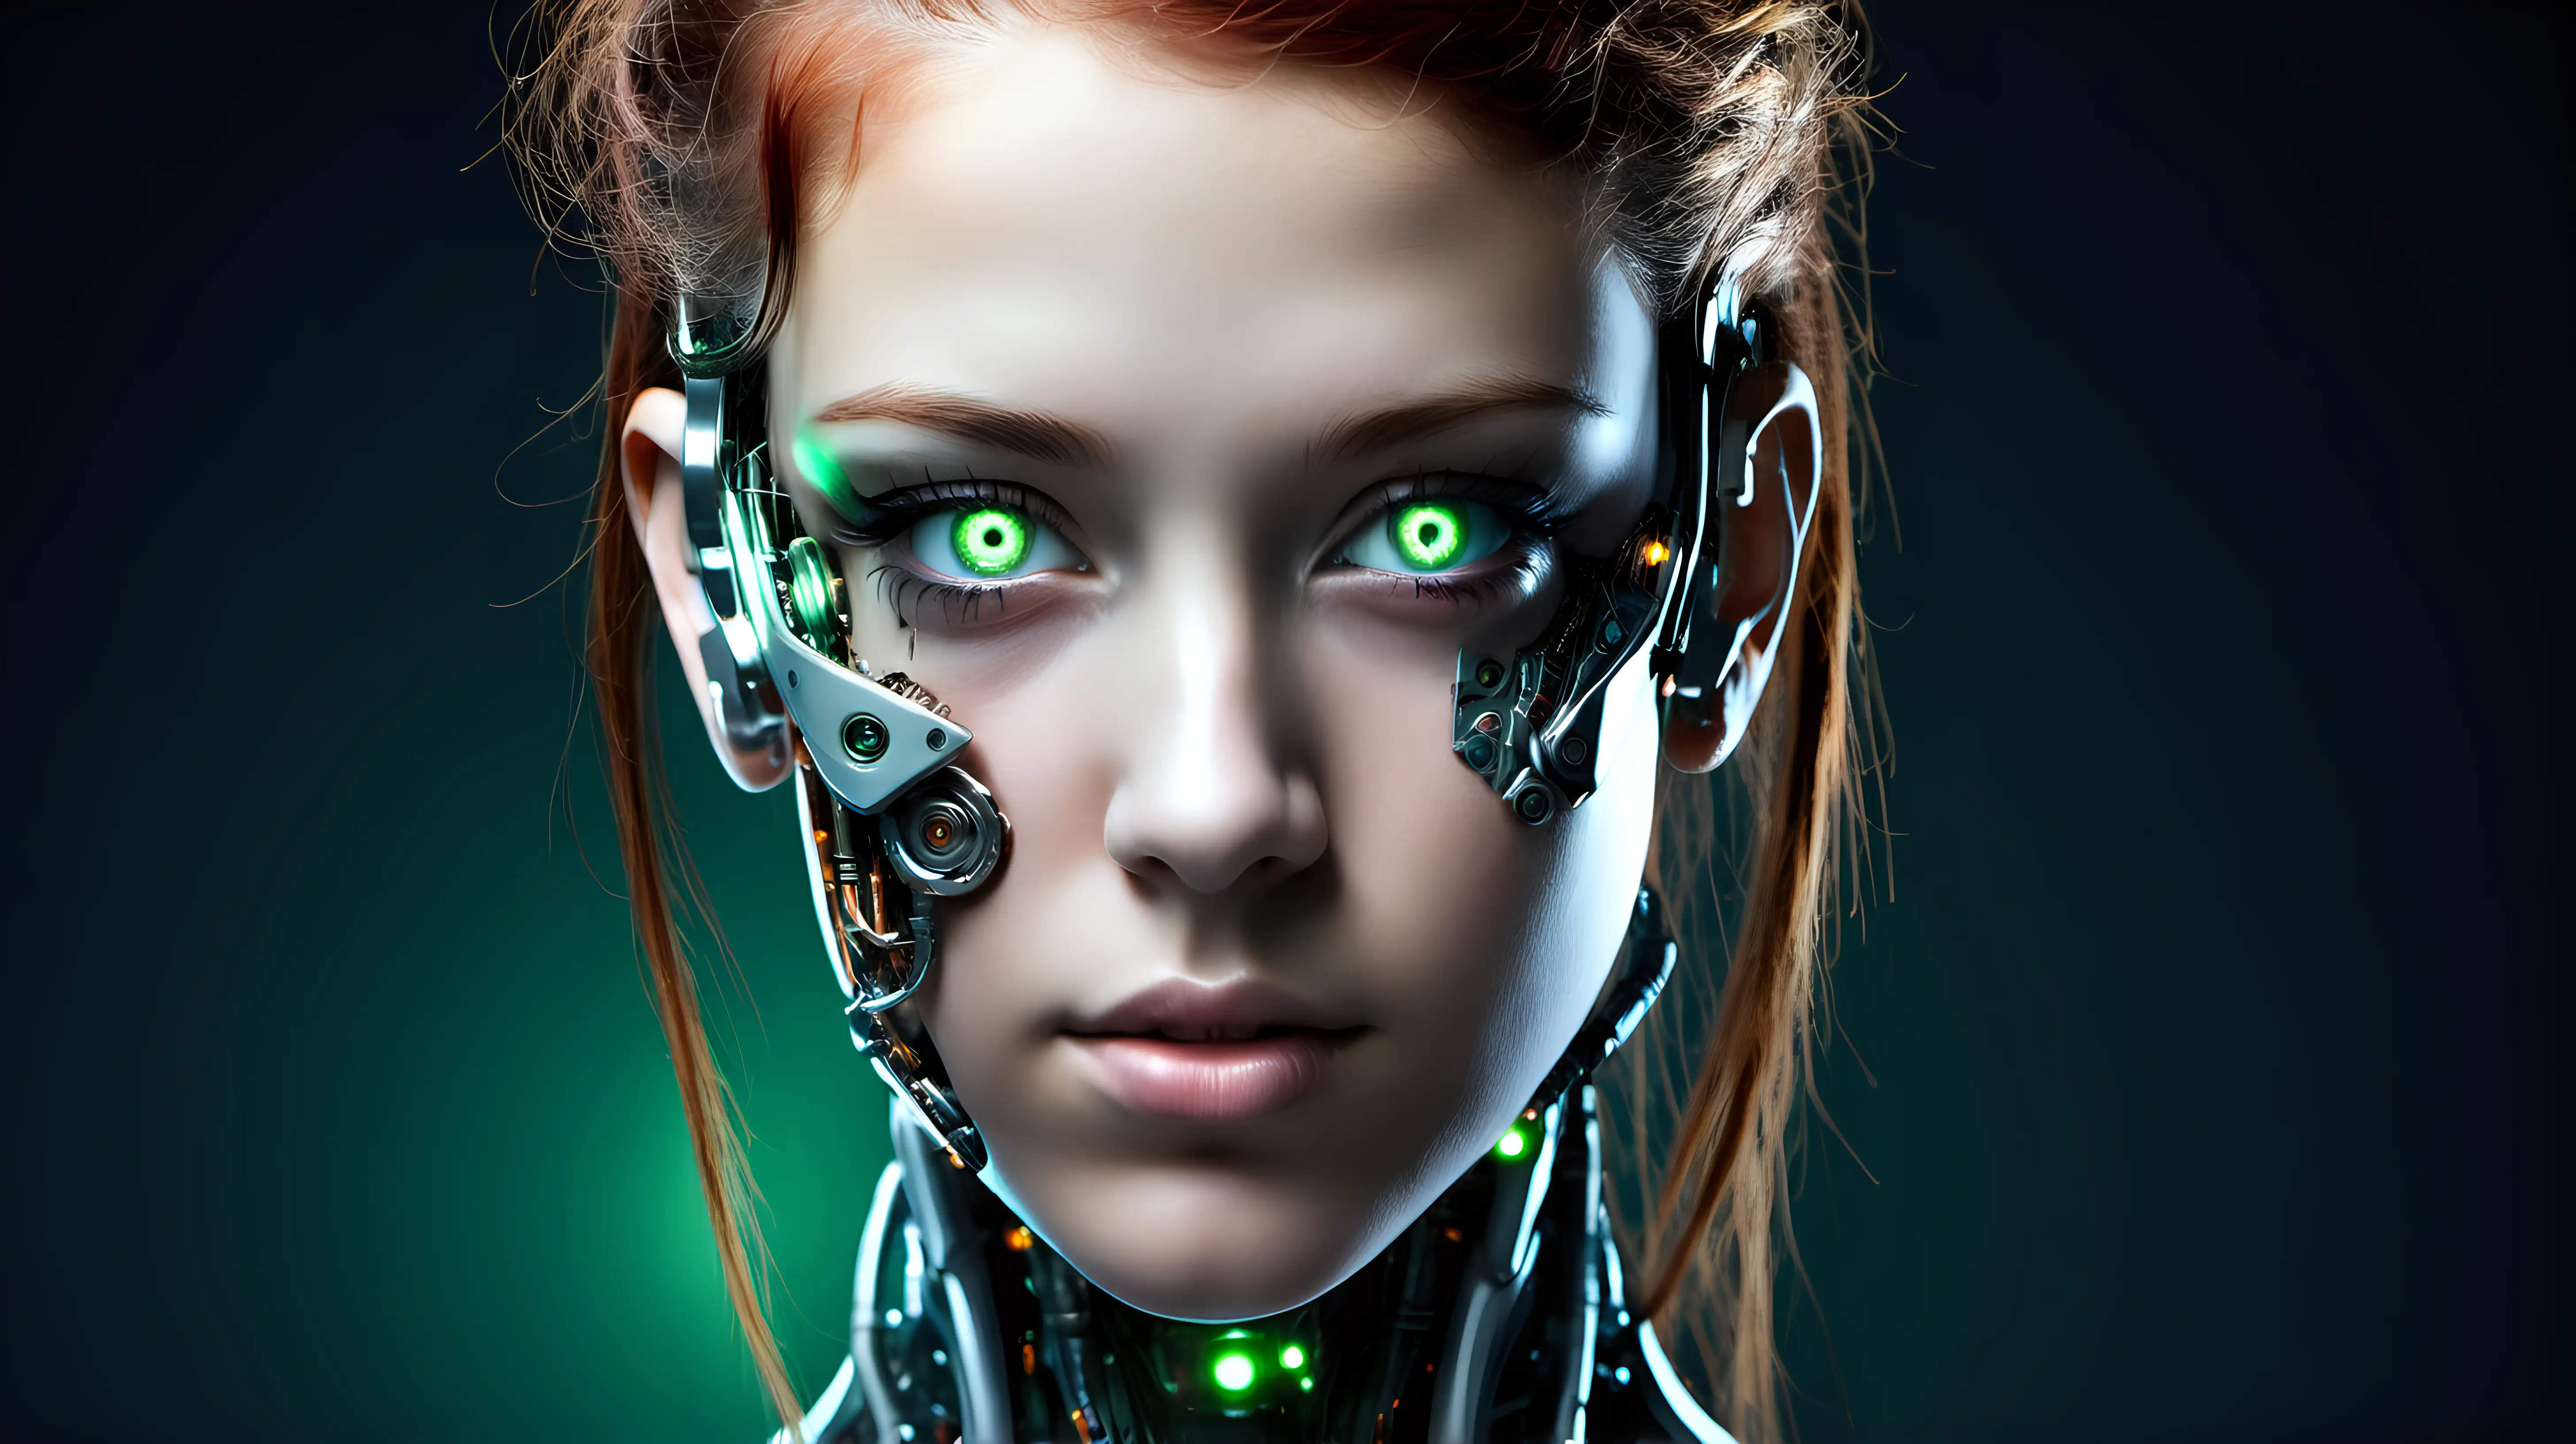 Cyborg woman, 18 years old. She has a cyborg face, but she is extremely beautiful. Green eyes.